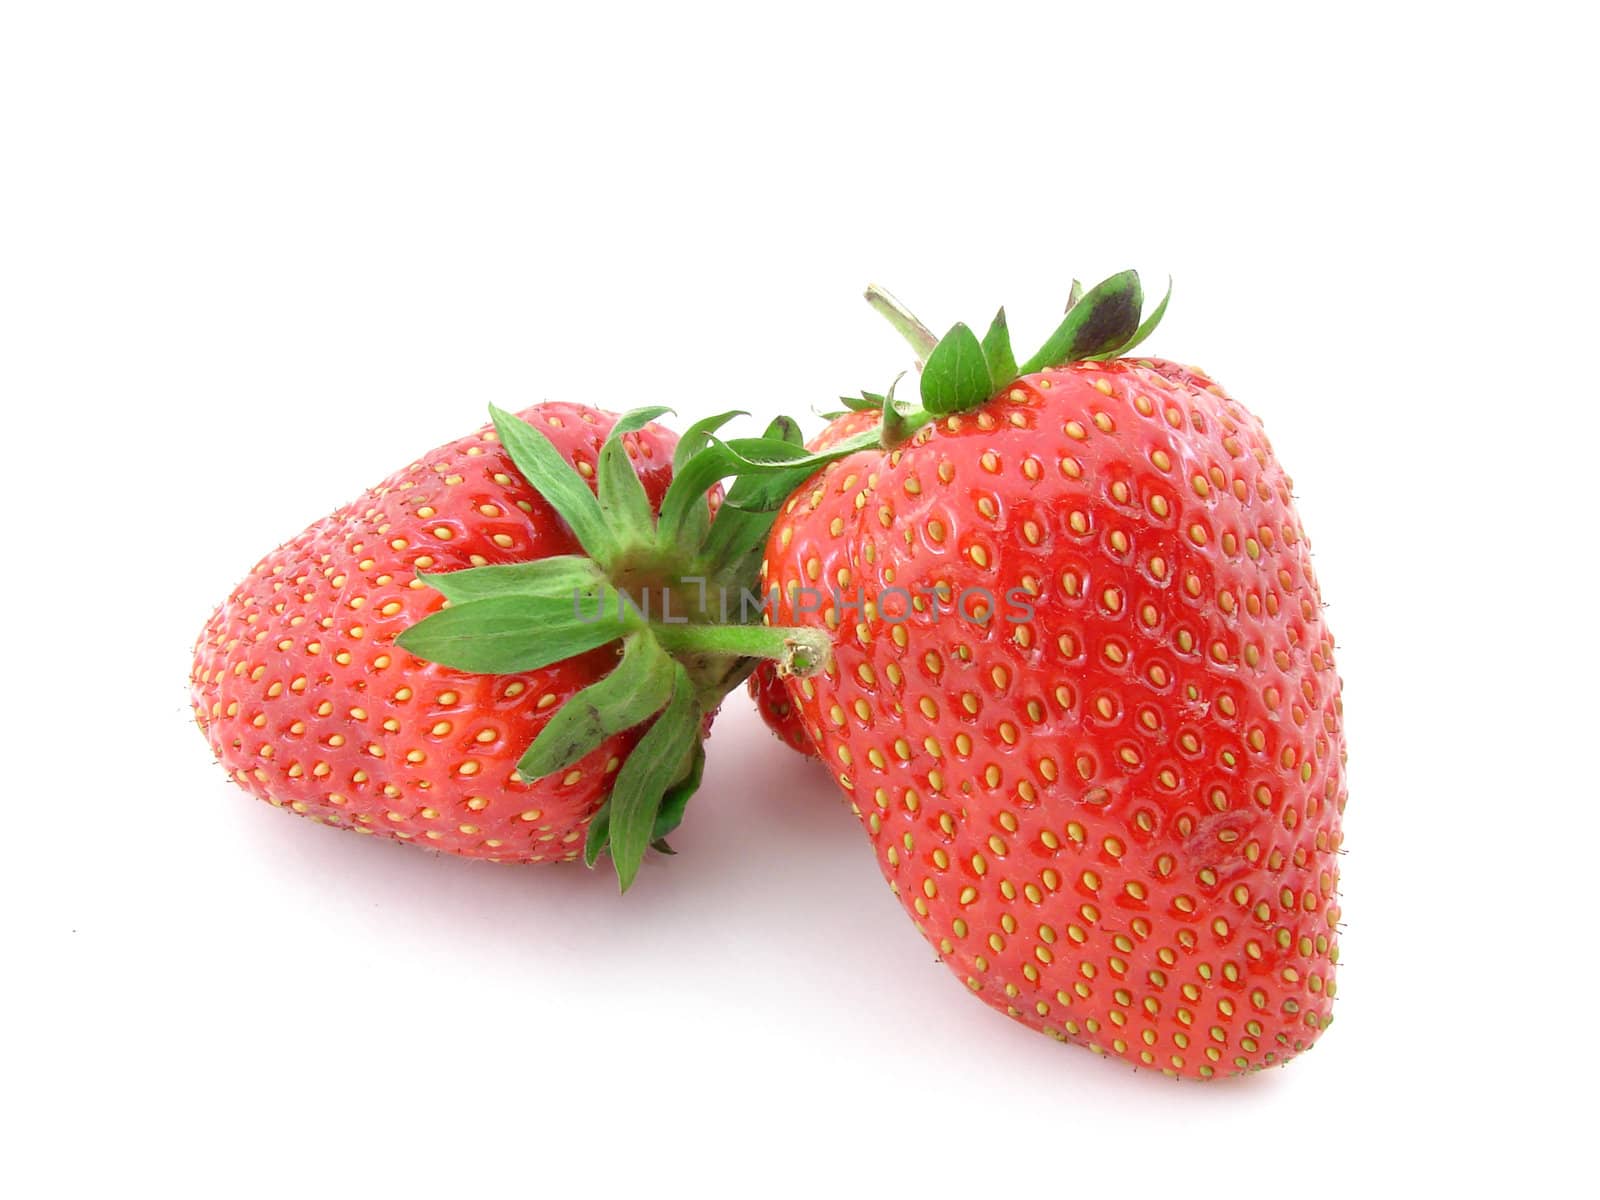 Strawberries isolated over white background.